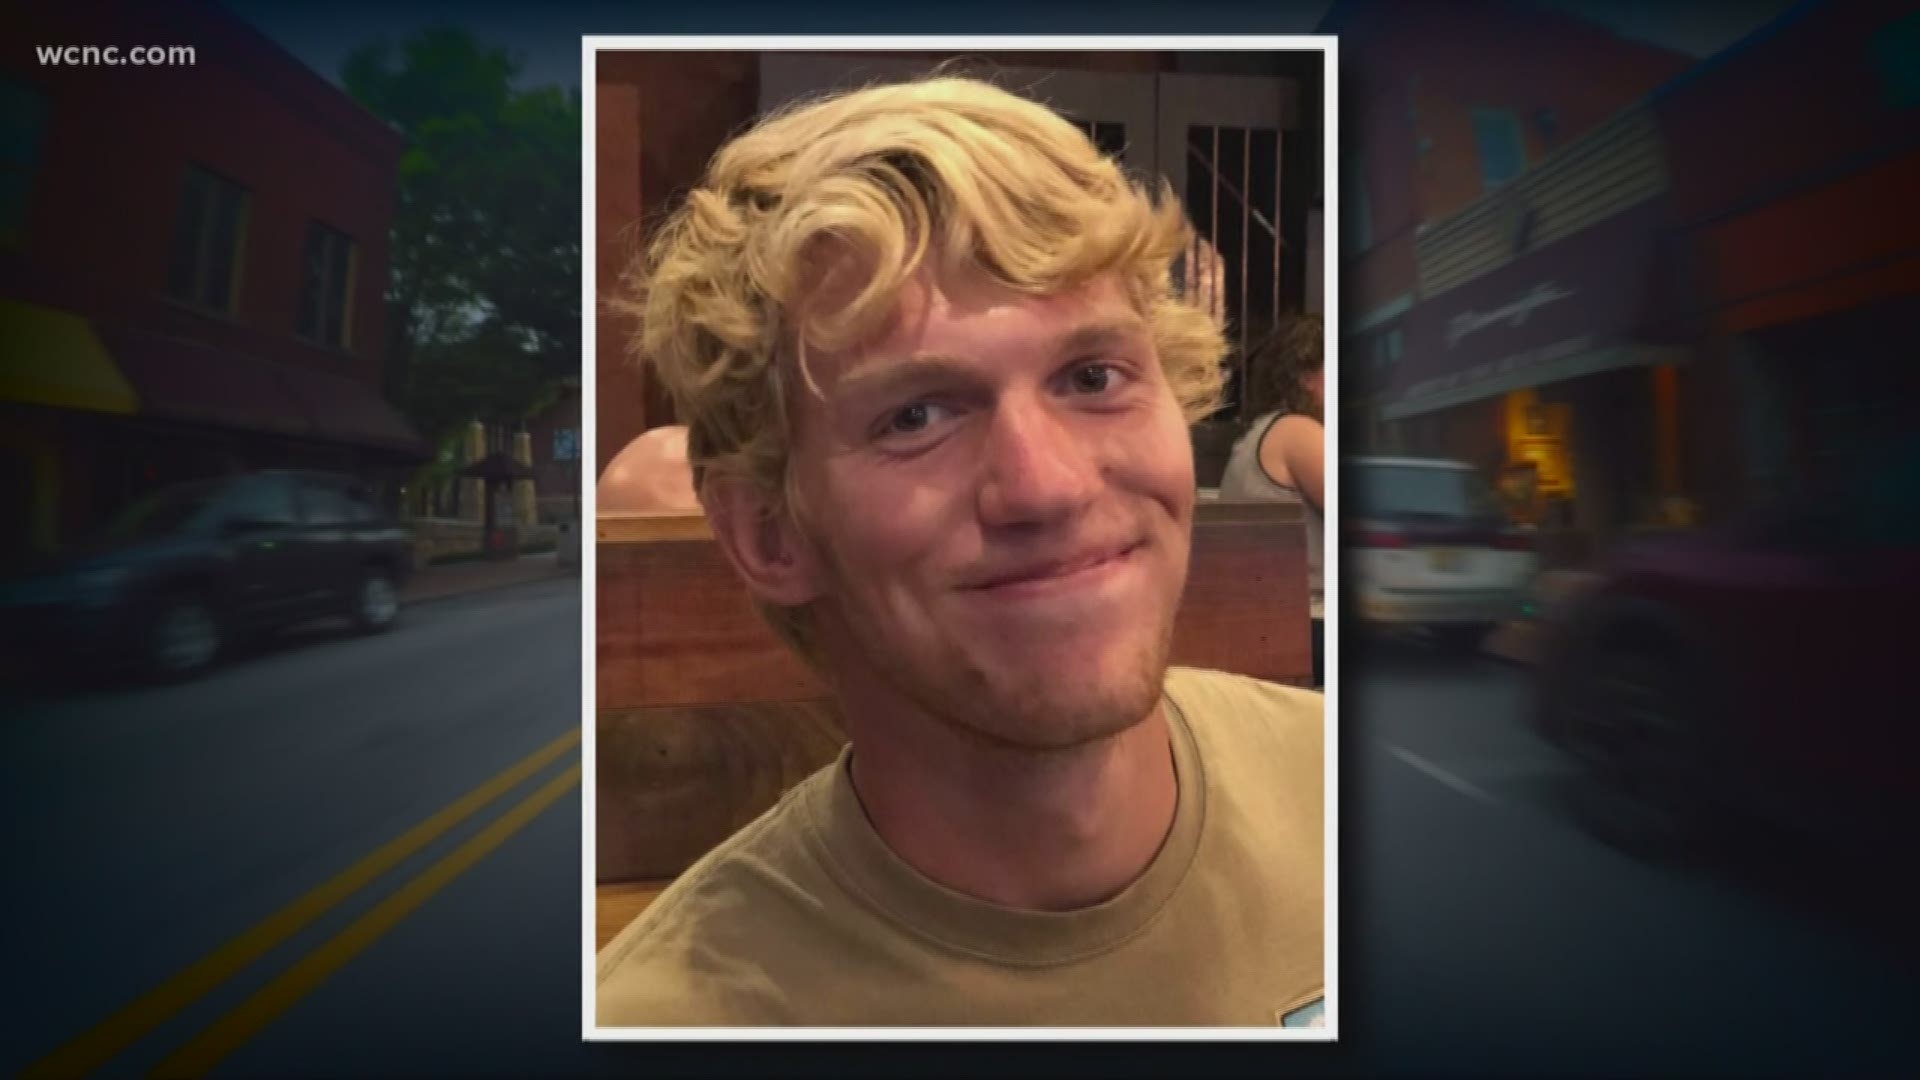 Police say Riley risked his life to protect his peers when a gunman started shooting in a UNCC classroom. Riley died after being shot. His family says he always put others before himself.